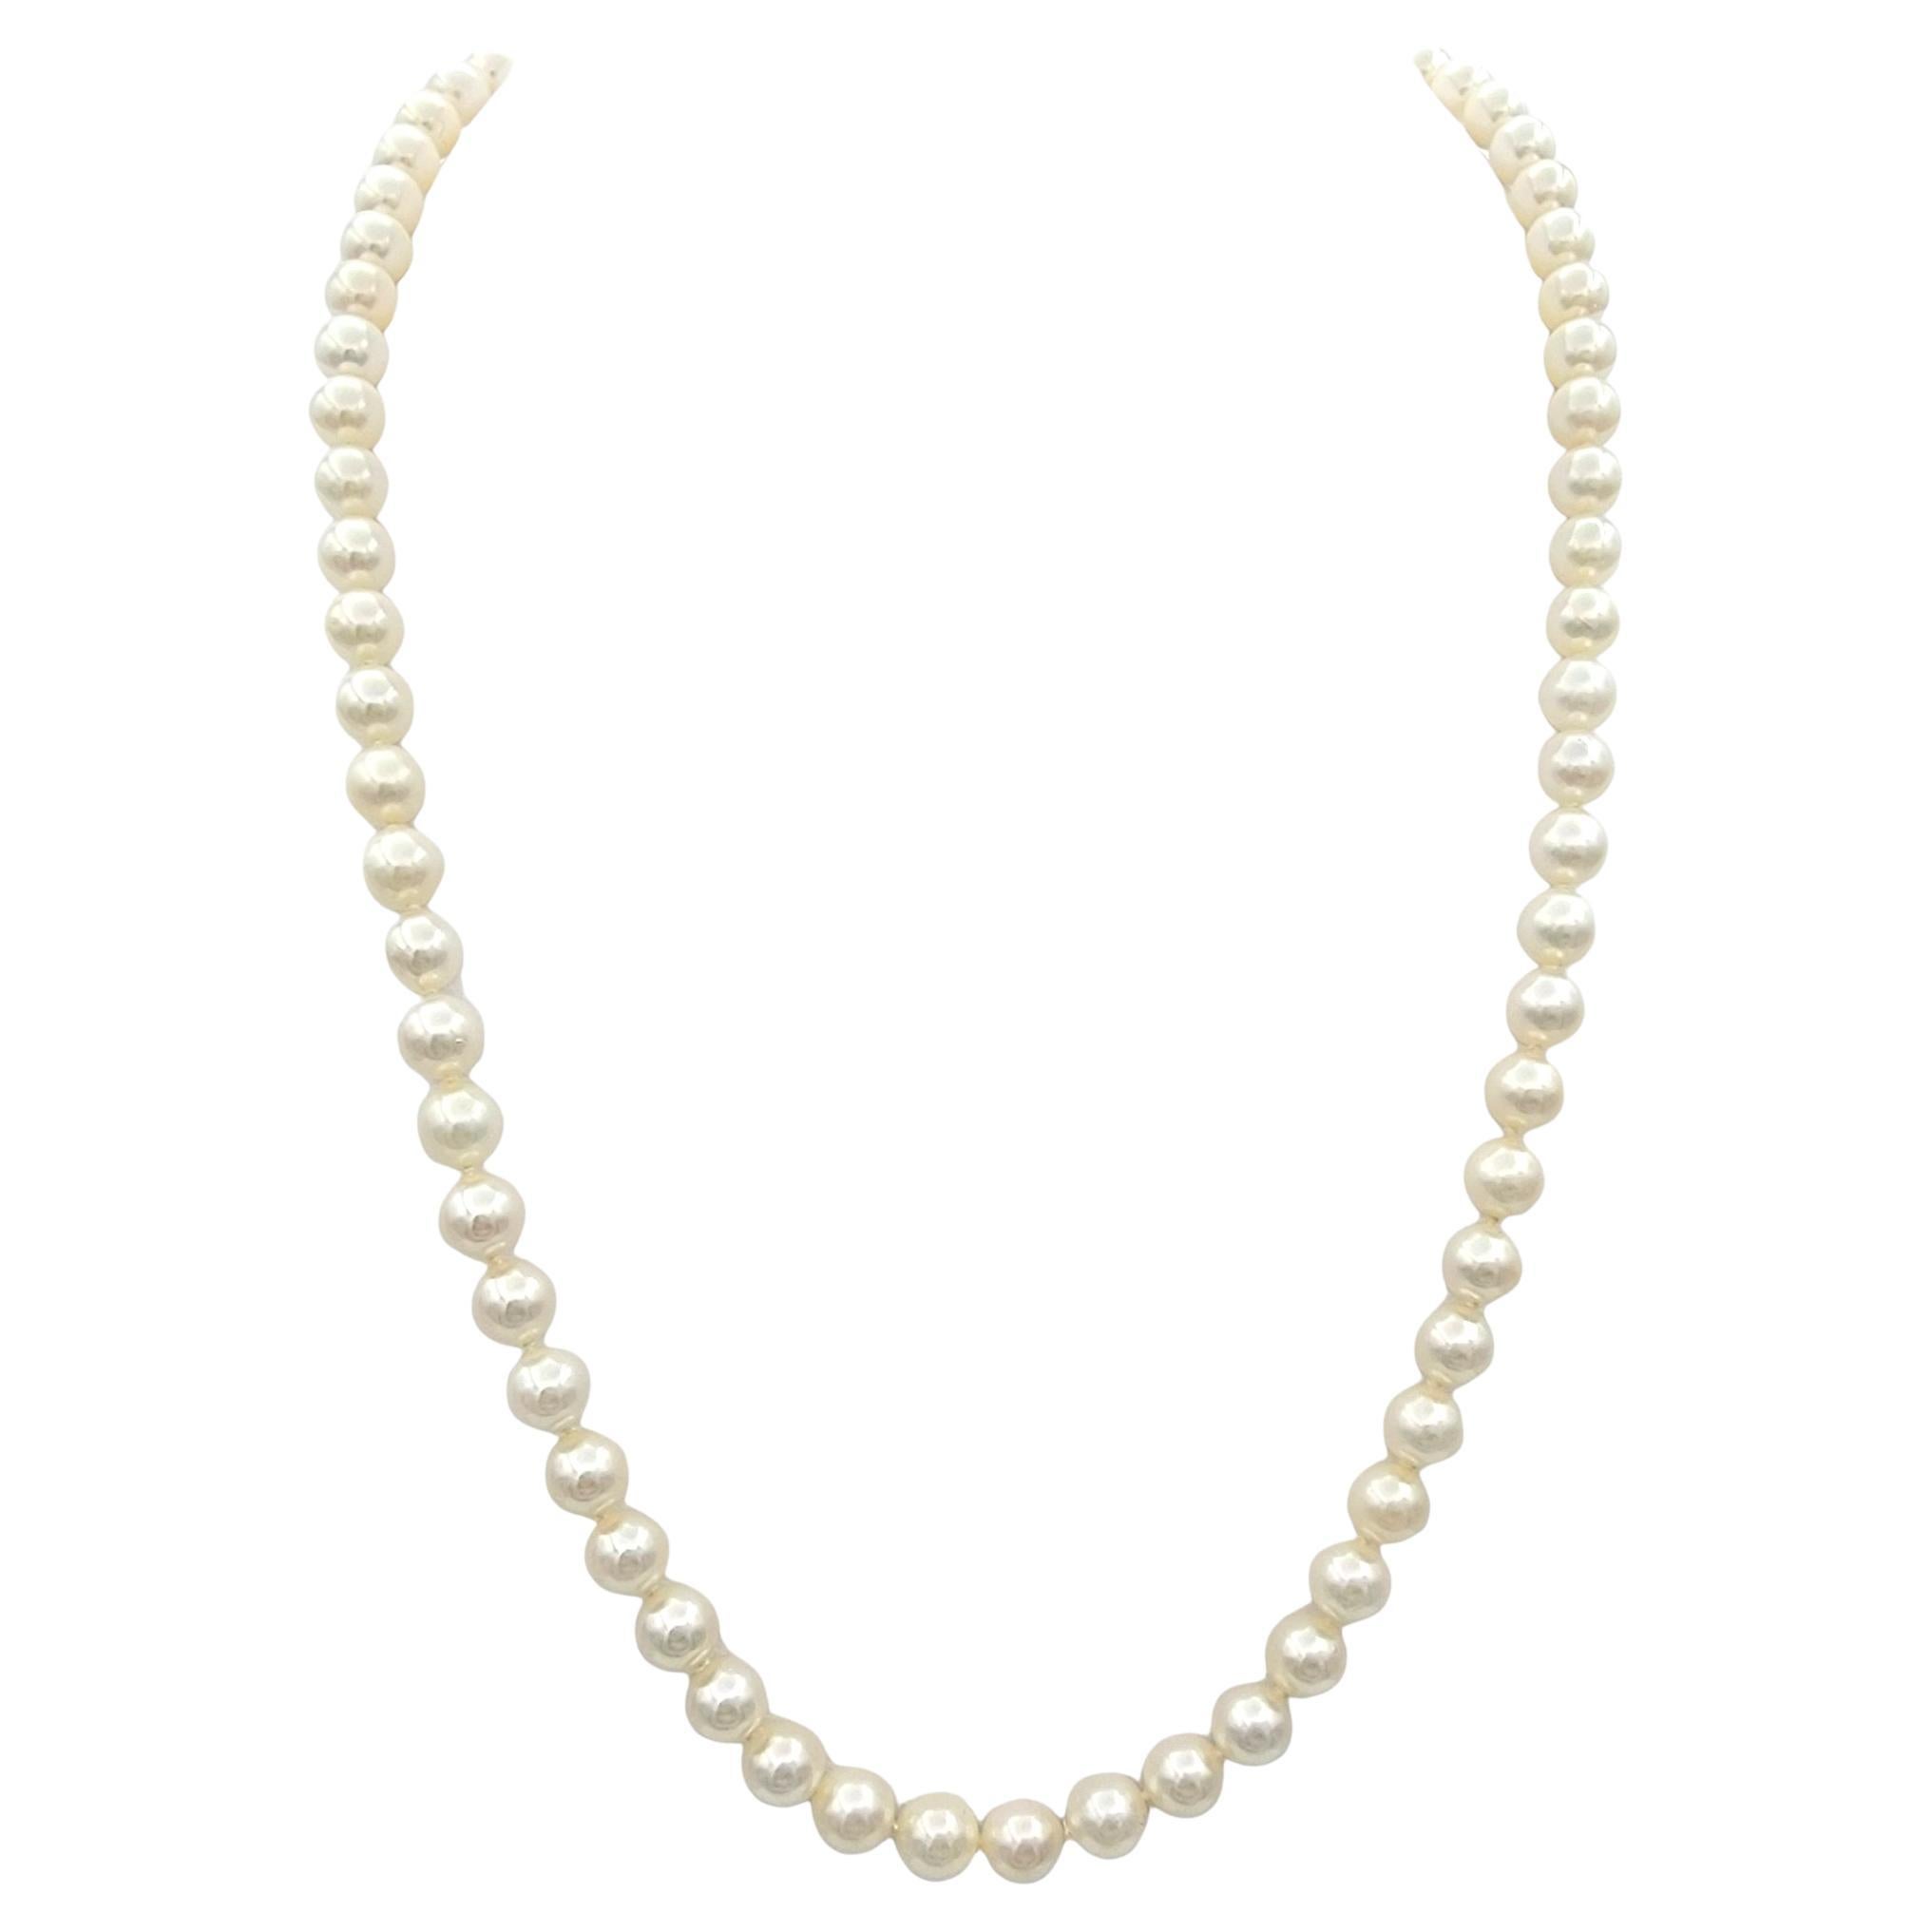 Mikimoto Cultured Akoya Pearl 20" Strand Necklace with 18 Karat Gold Clasp